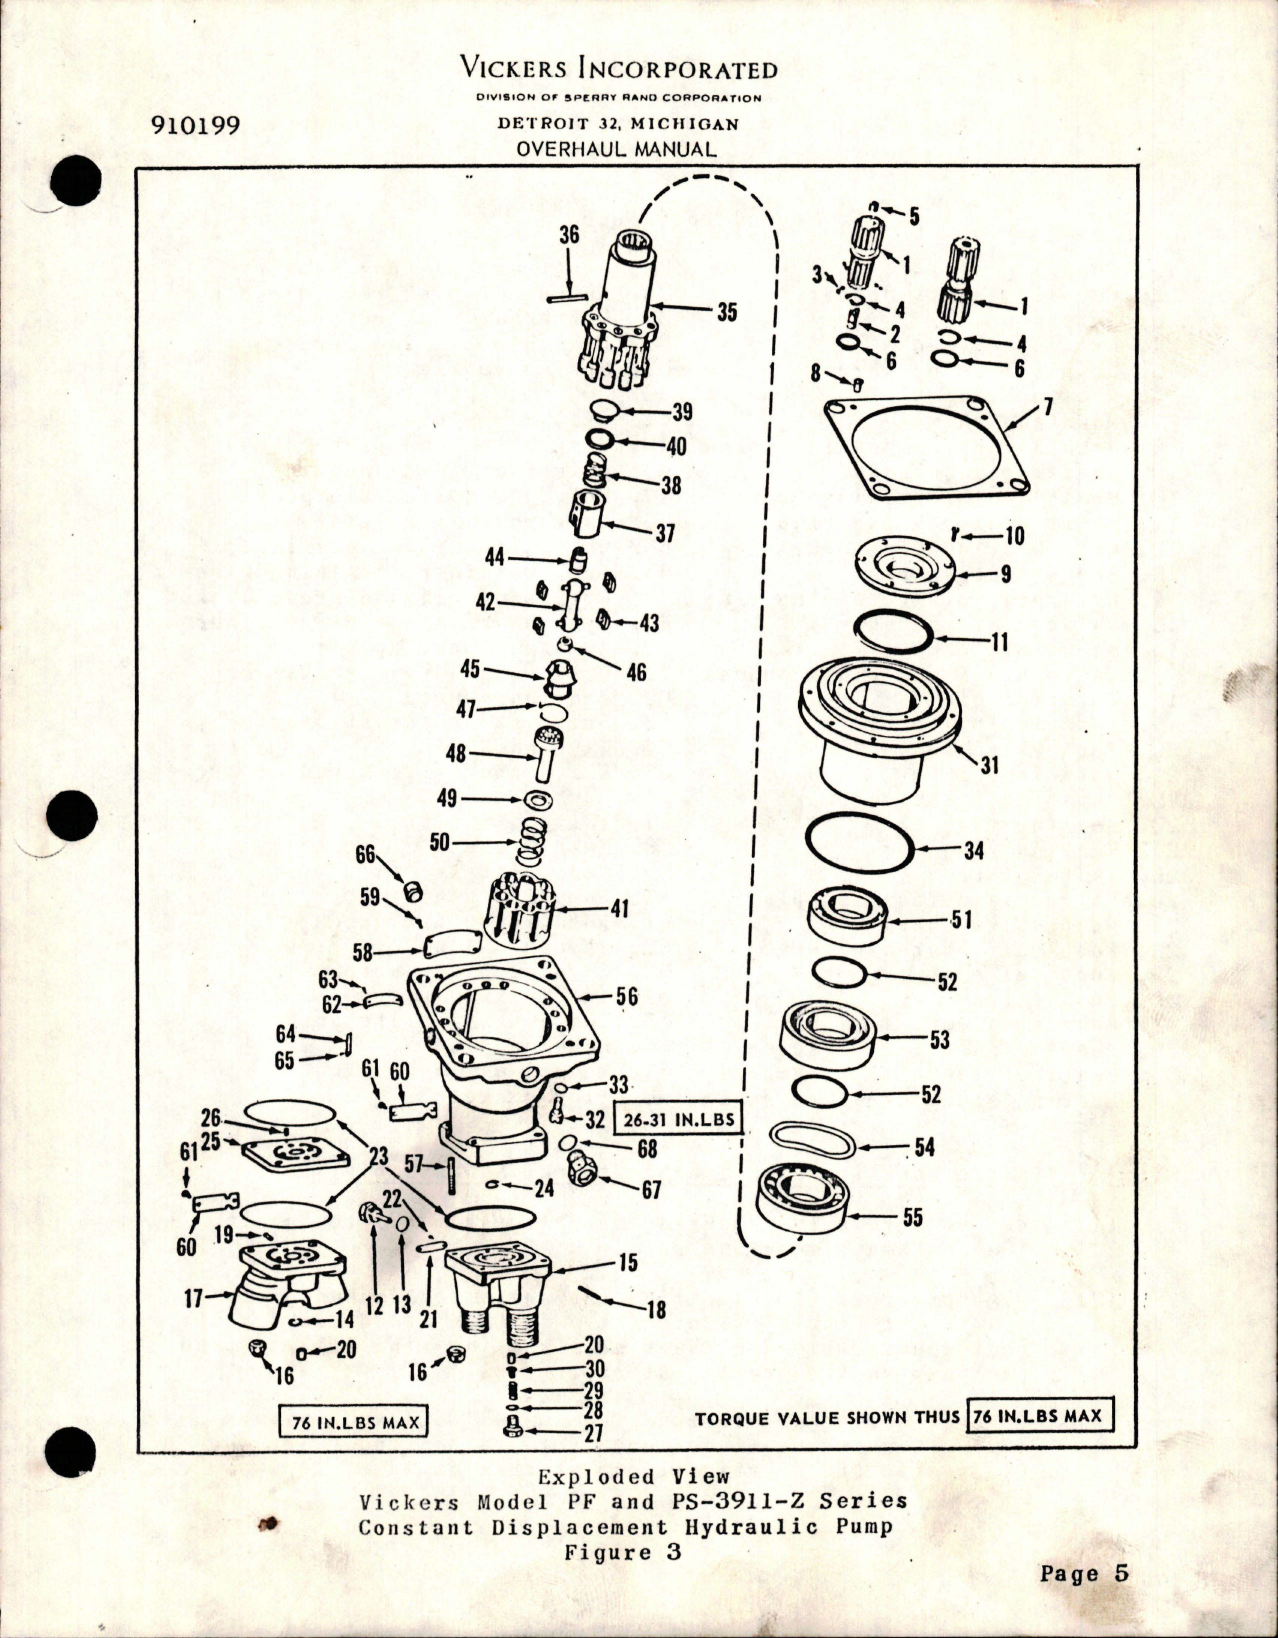 Sample page 7 from AirCorps Library document: Overhaul Manual for Constant Displacement Hydraulic Pumps - PF and PS-3911-Z Series